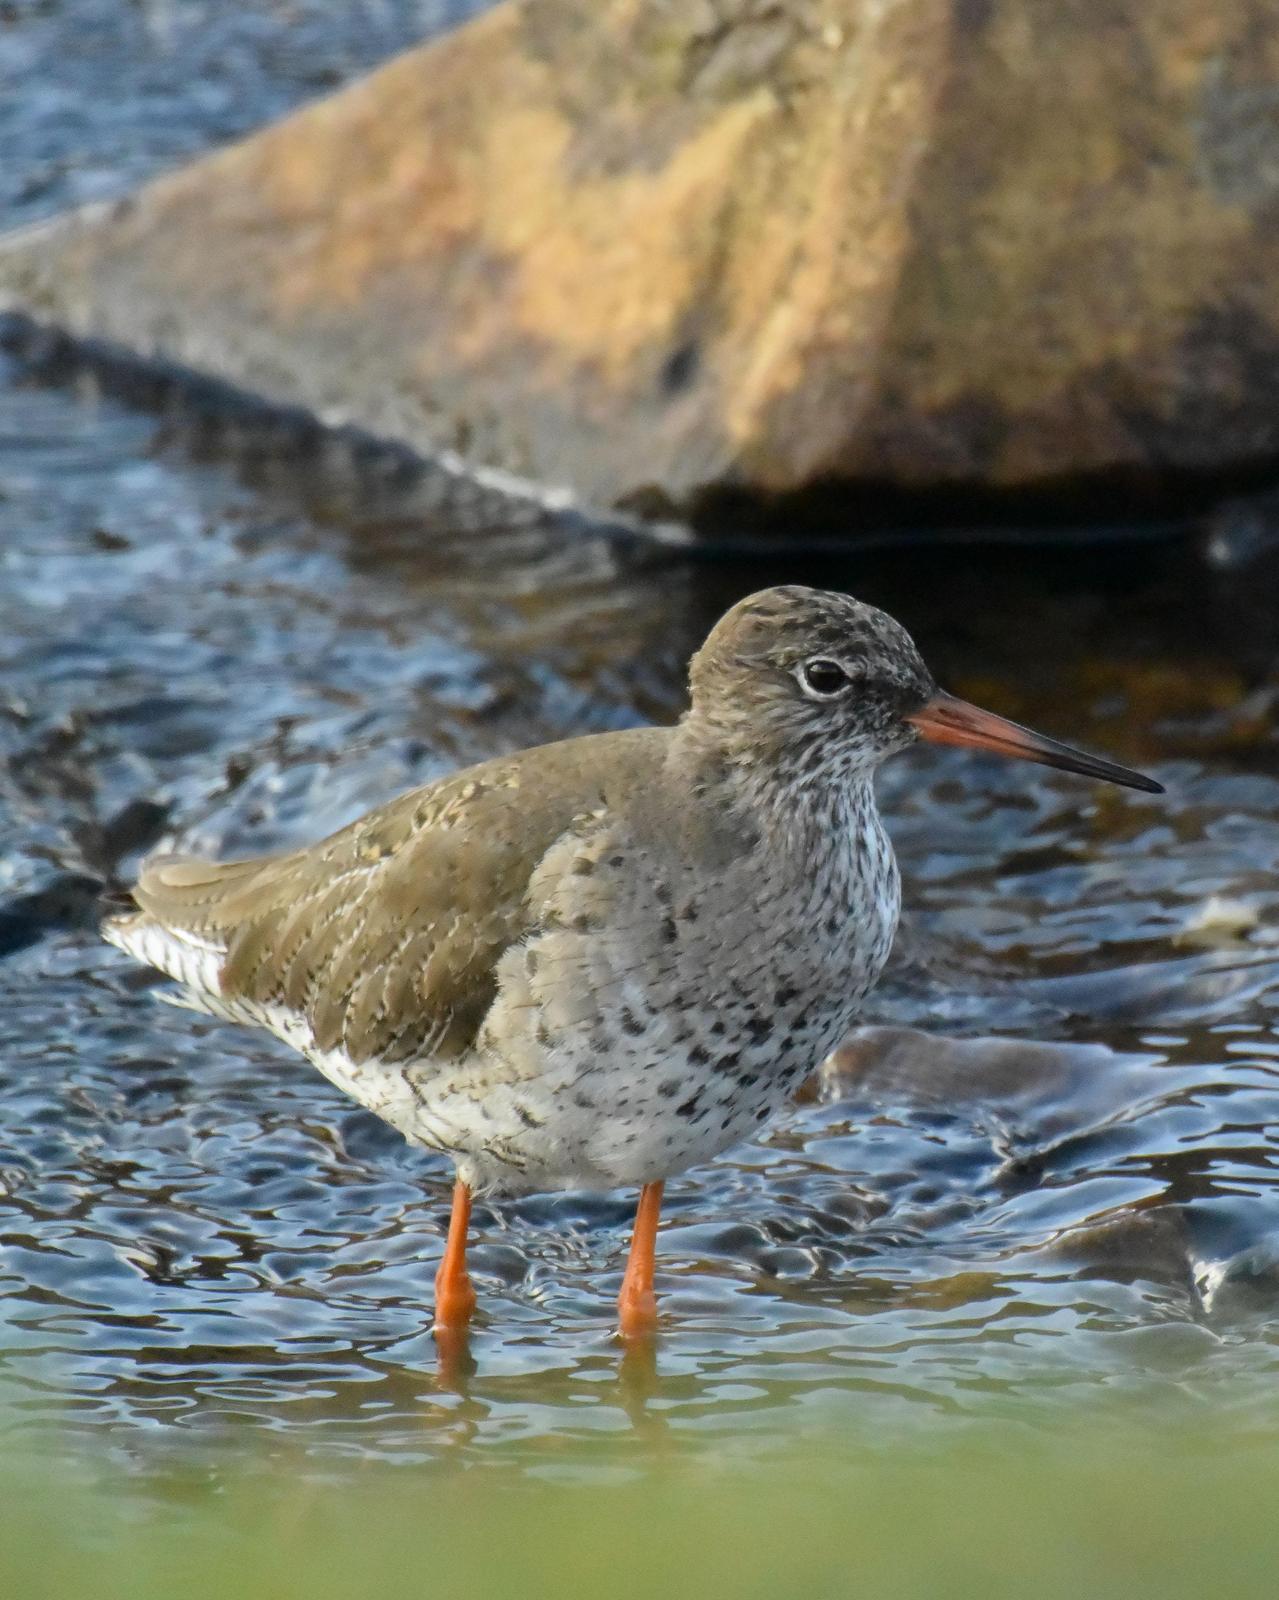 Common Redshank Photo by Emily Percival